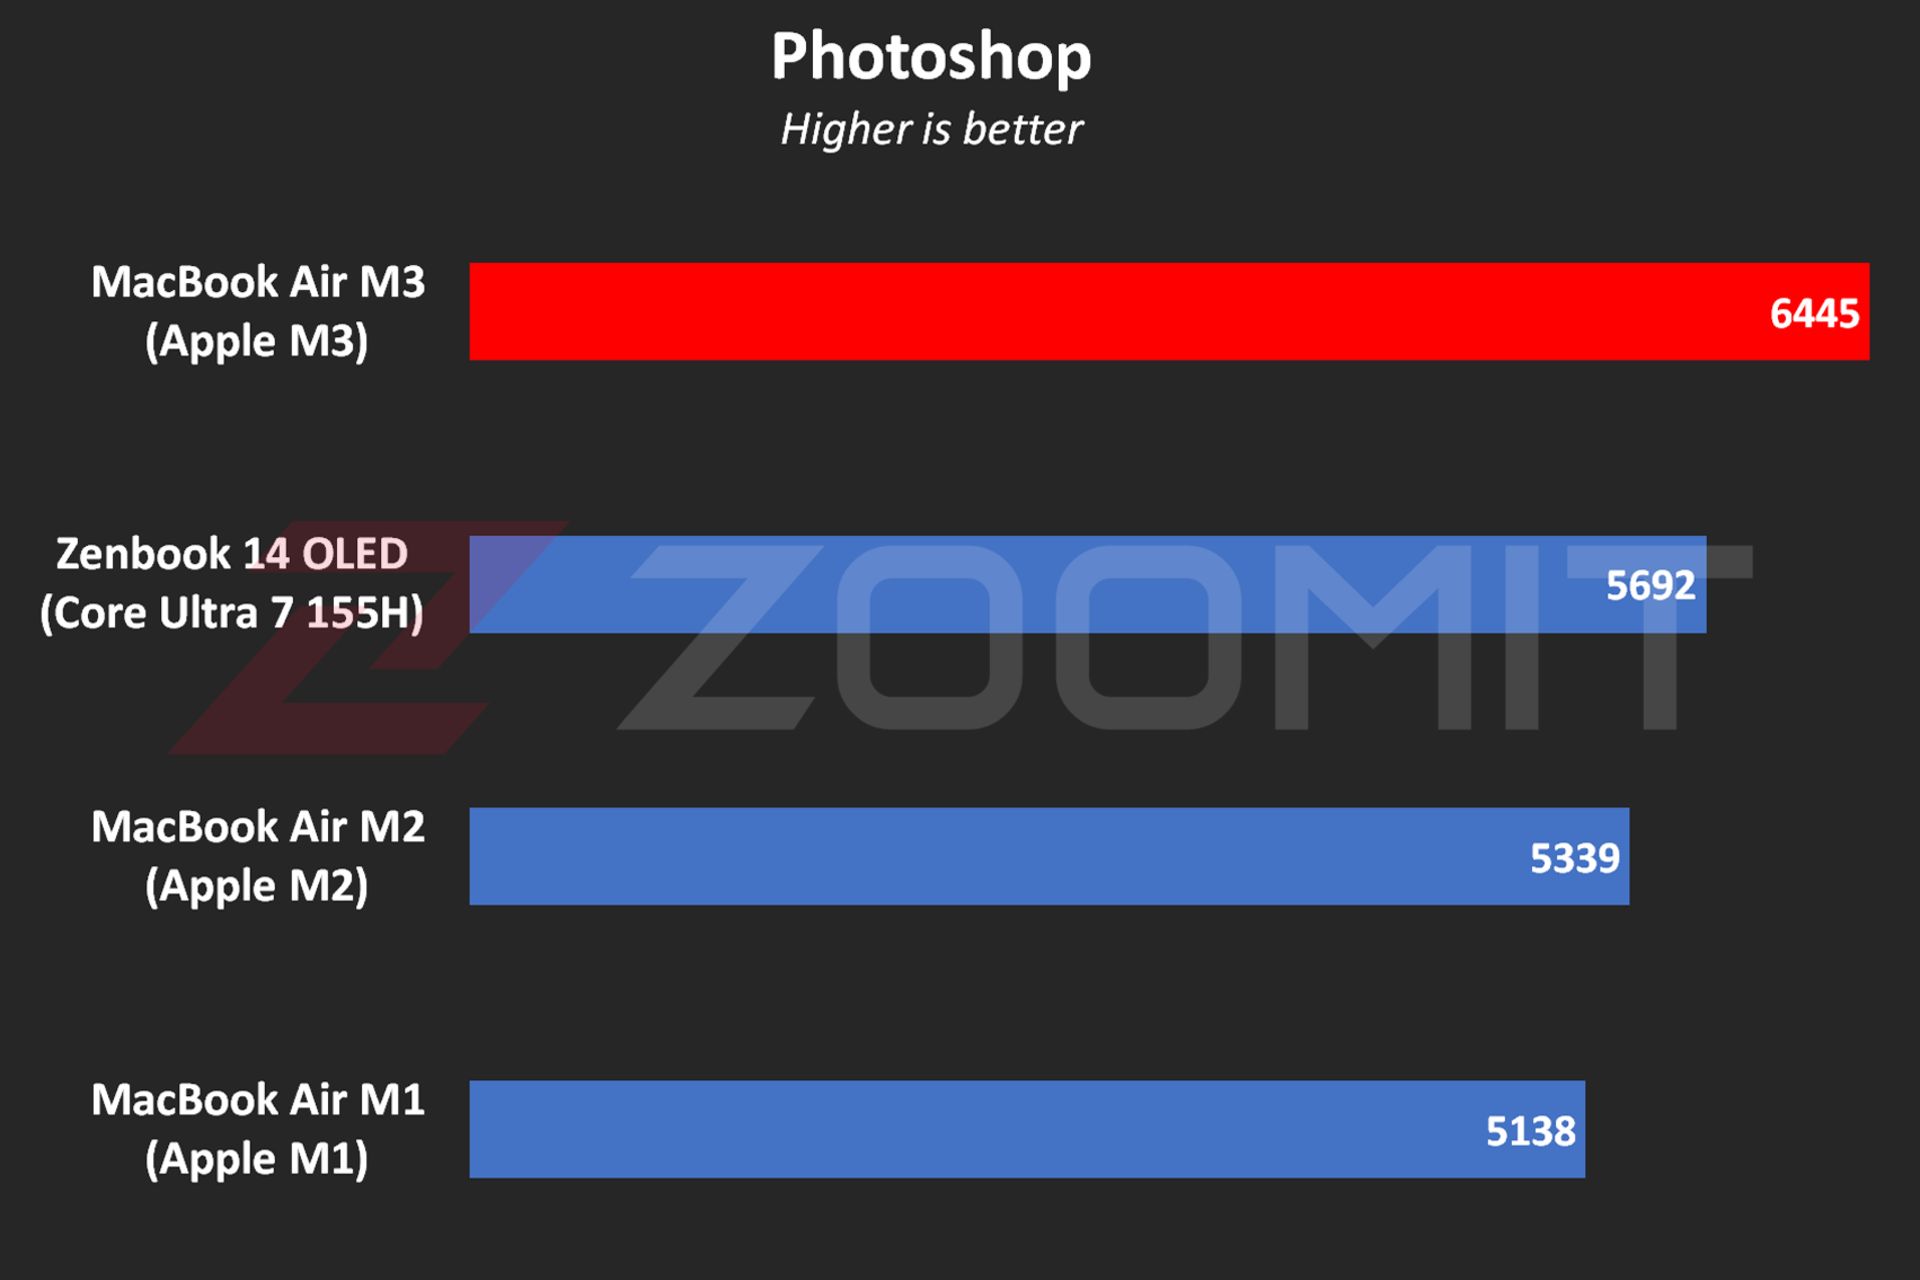 MacBook Air M3 performance in Photoshop software